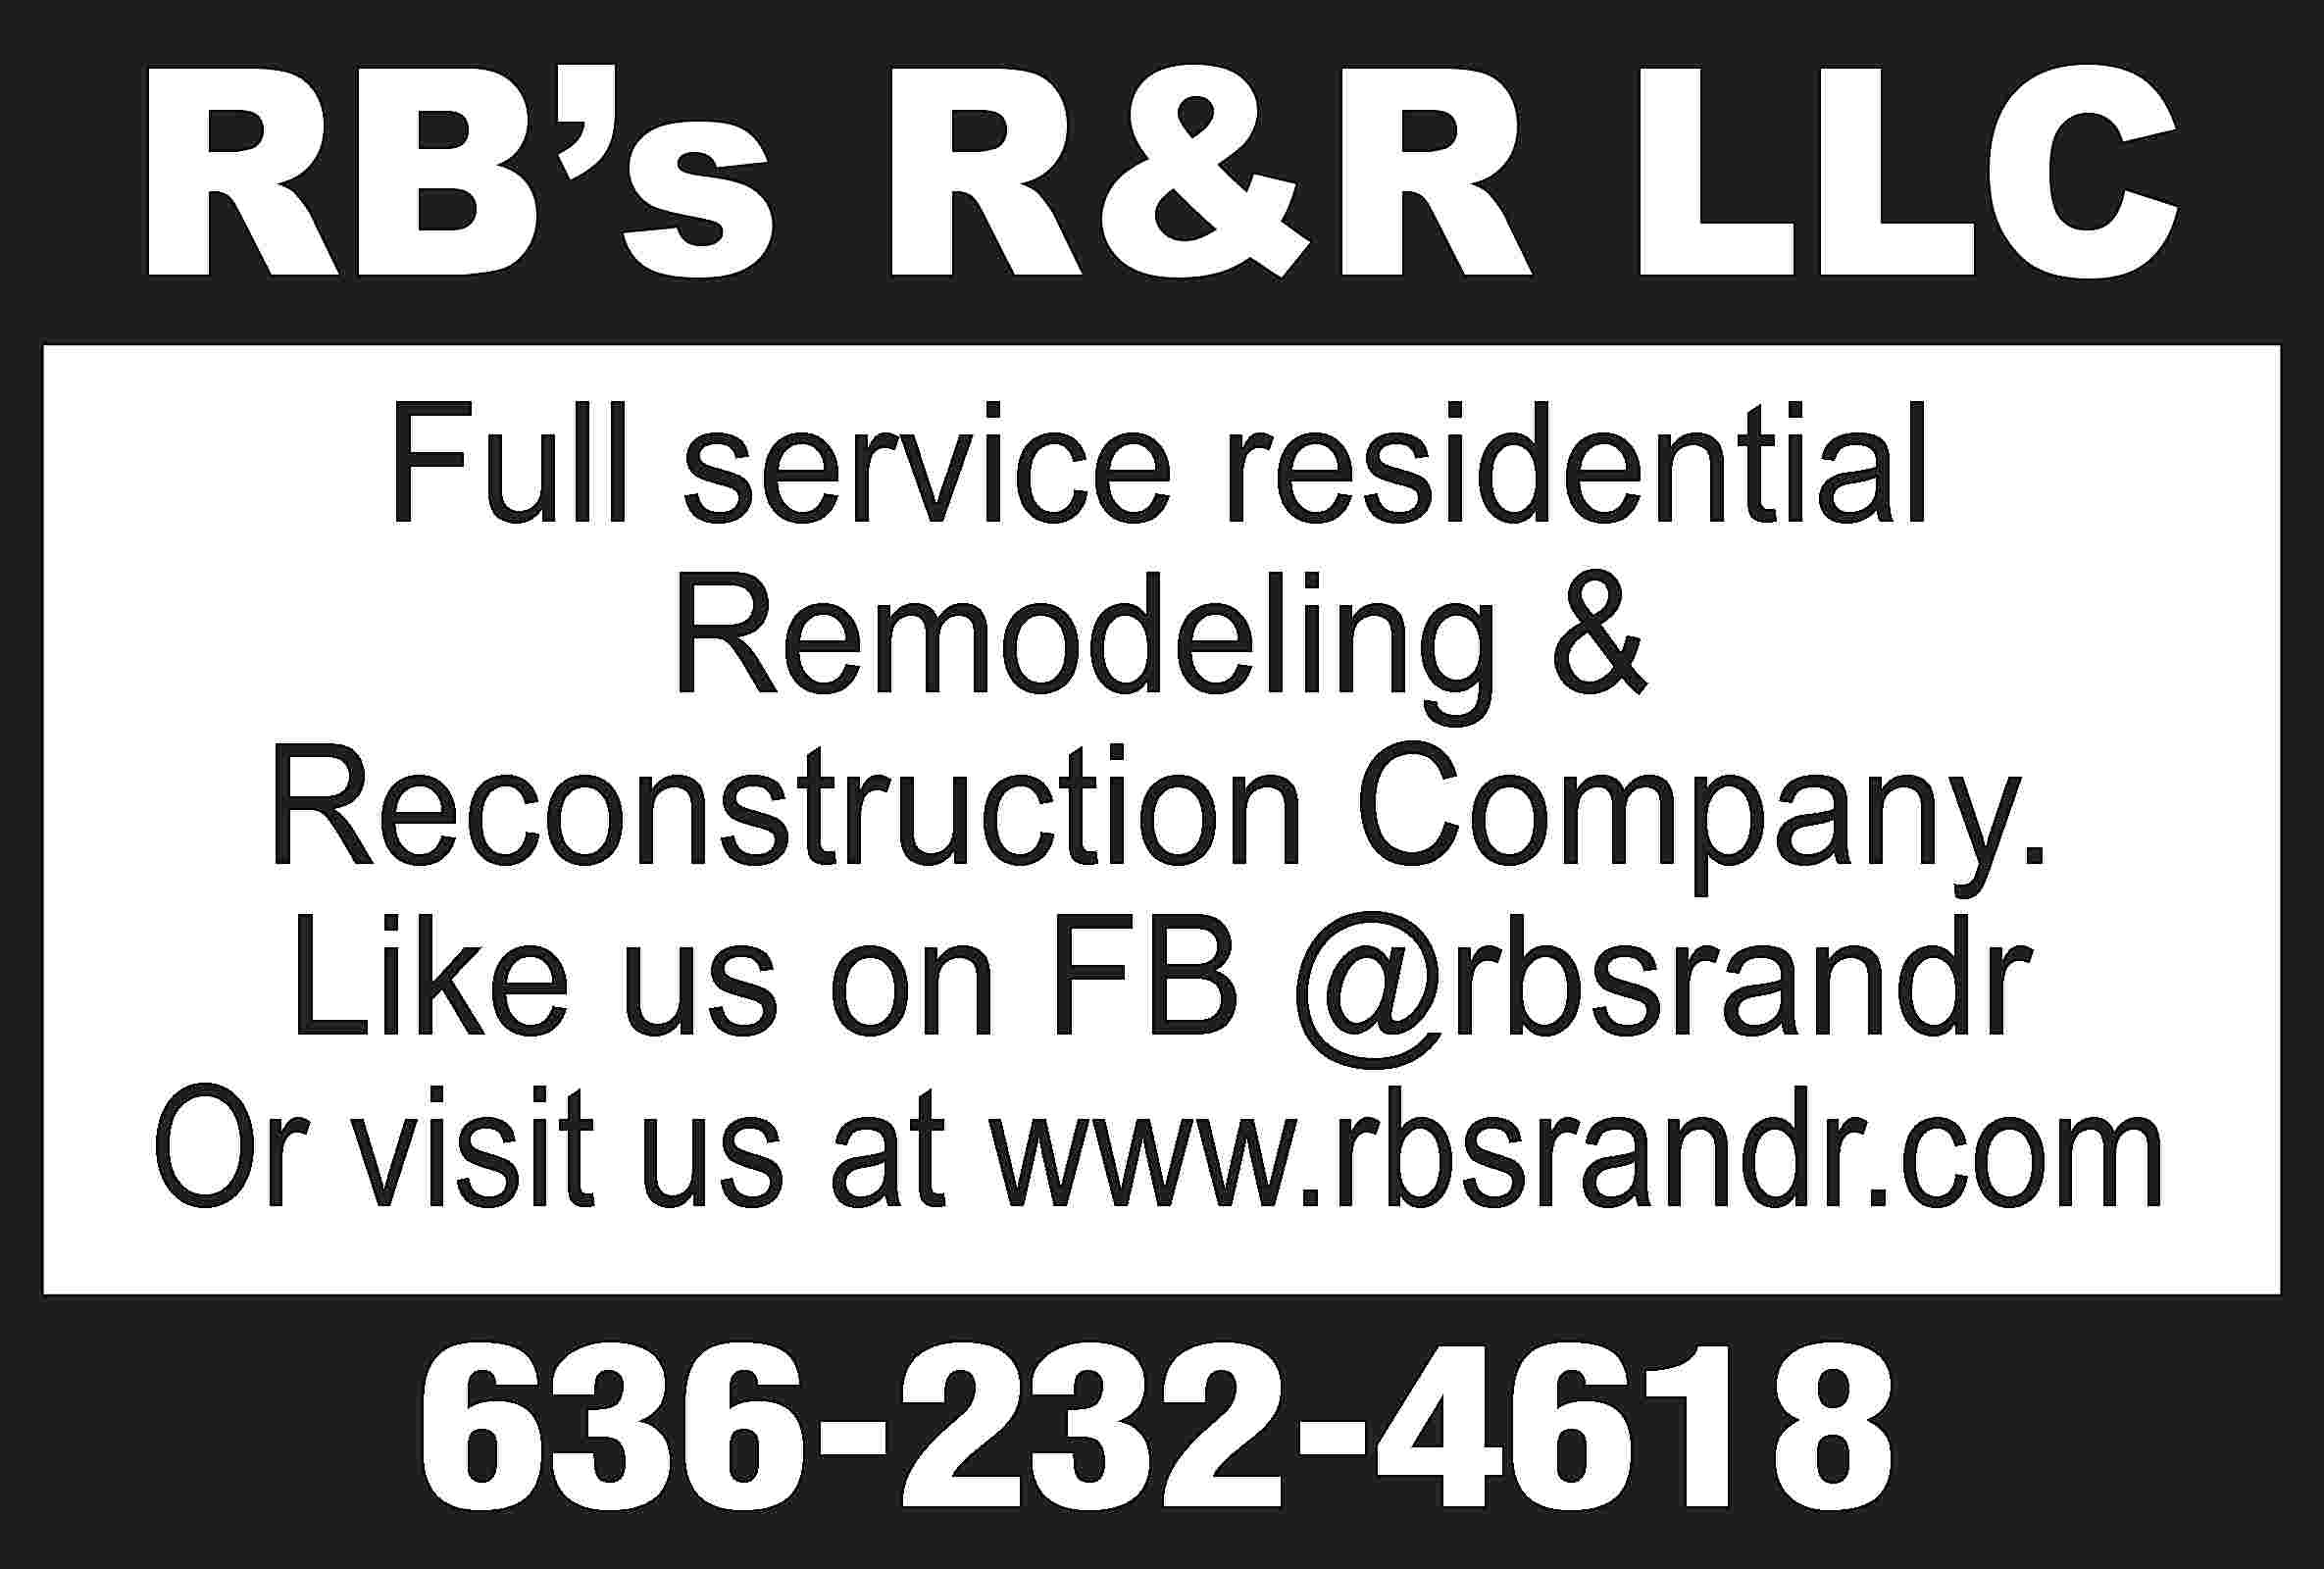 RB’s R&R LLC Full service  RB’s R&R LLC Full service residential Remodeling & Reconstruction Company. Like us on FB @rbsrandr Or visit us at www.rbsrandr.com 636-232-4618